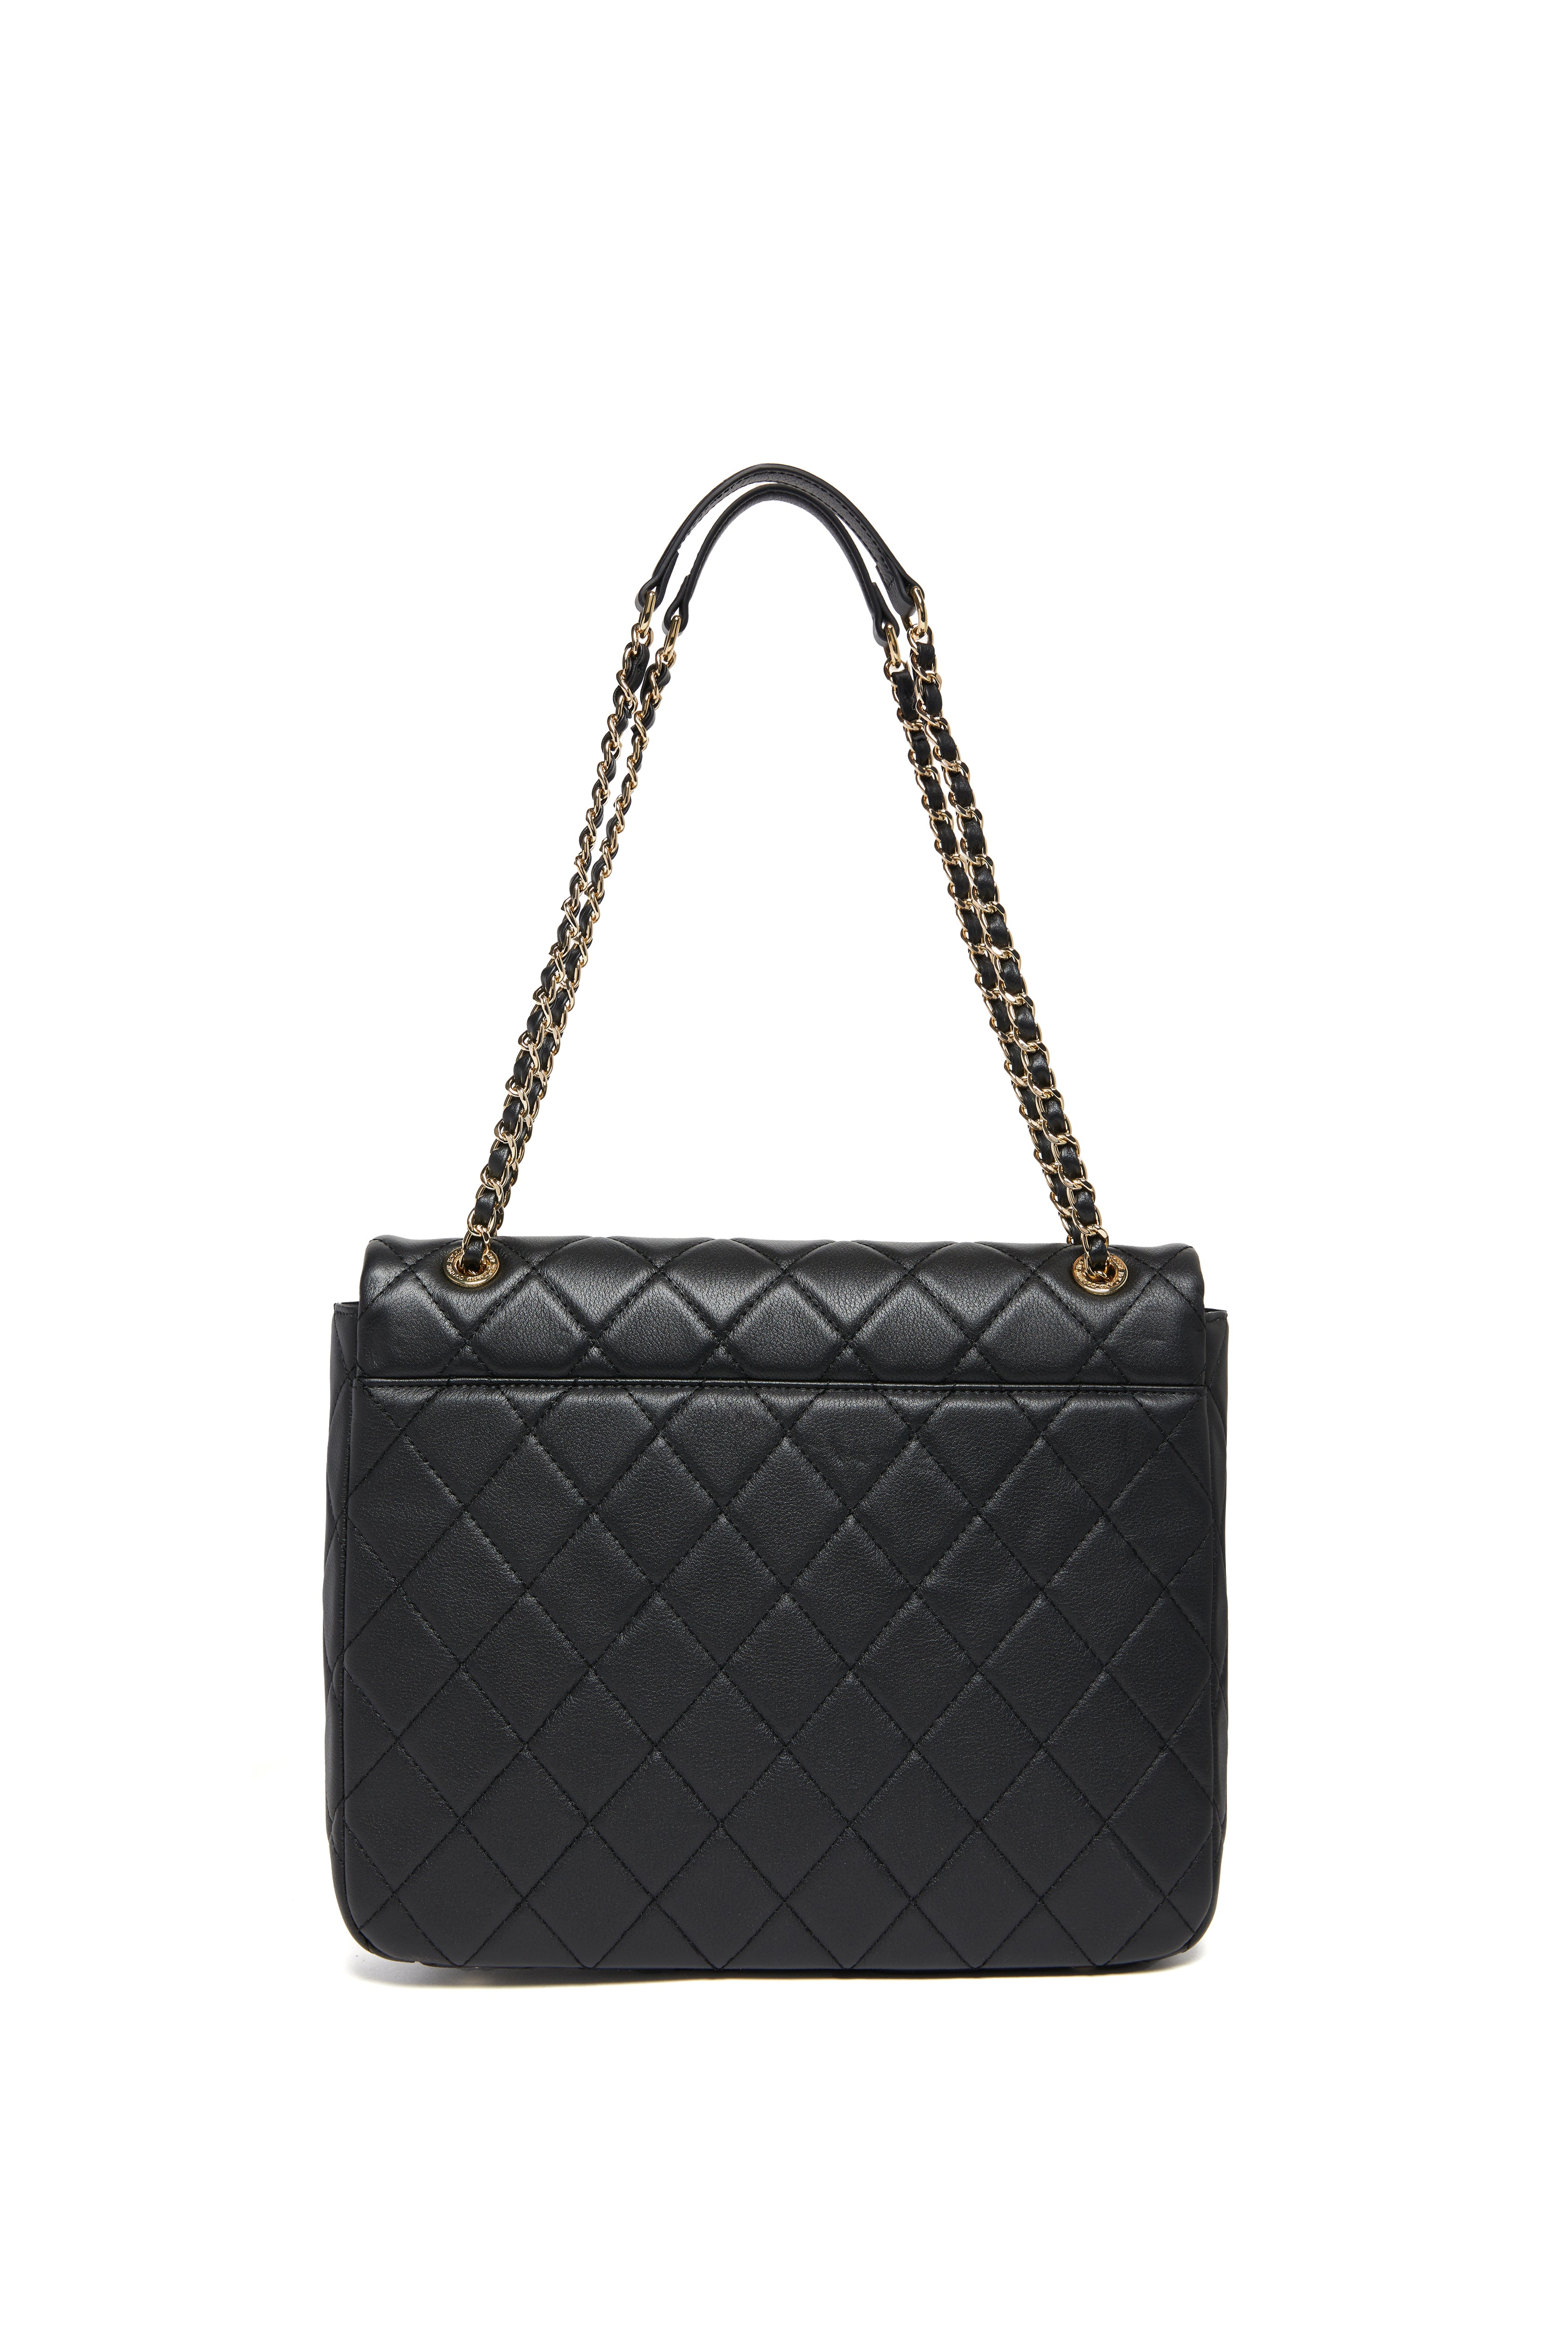 Holland Cooper Quilted Soho Bag Black Women's One Size